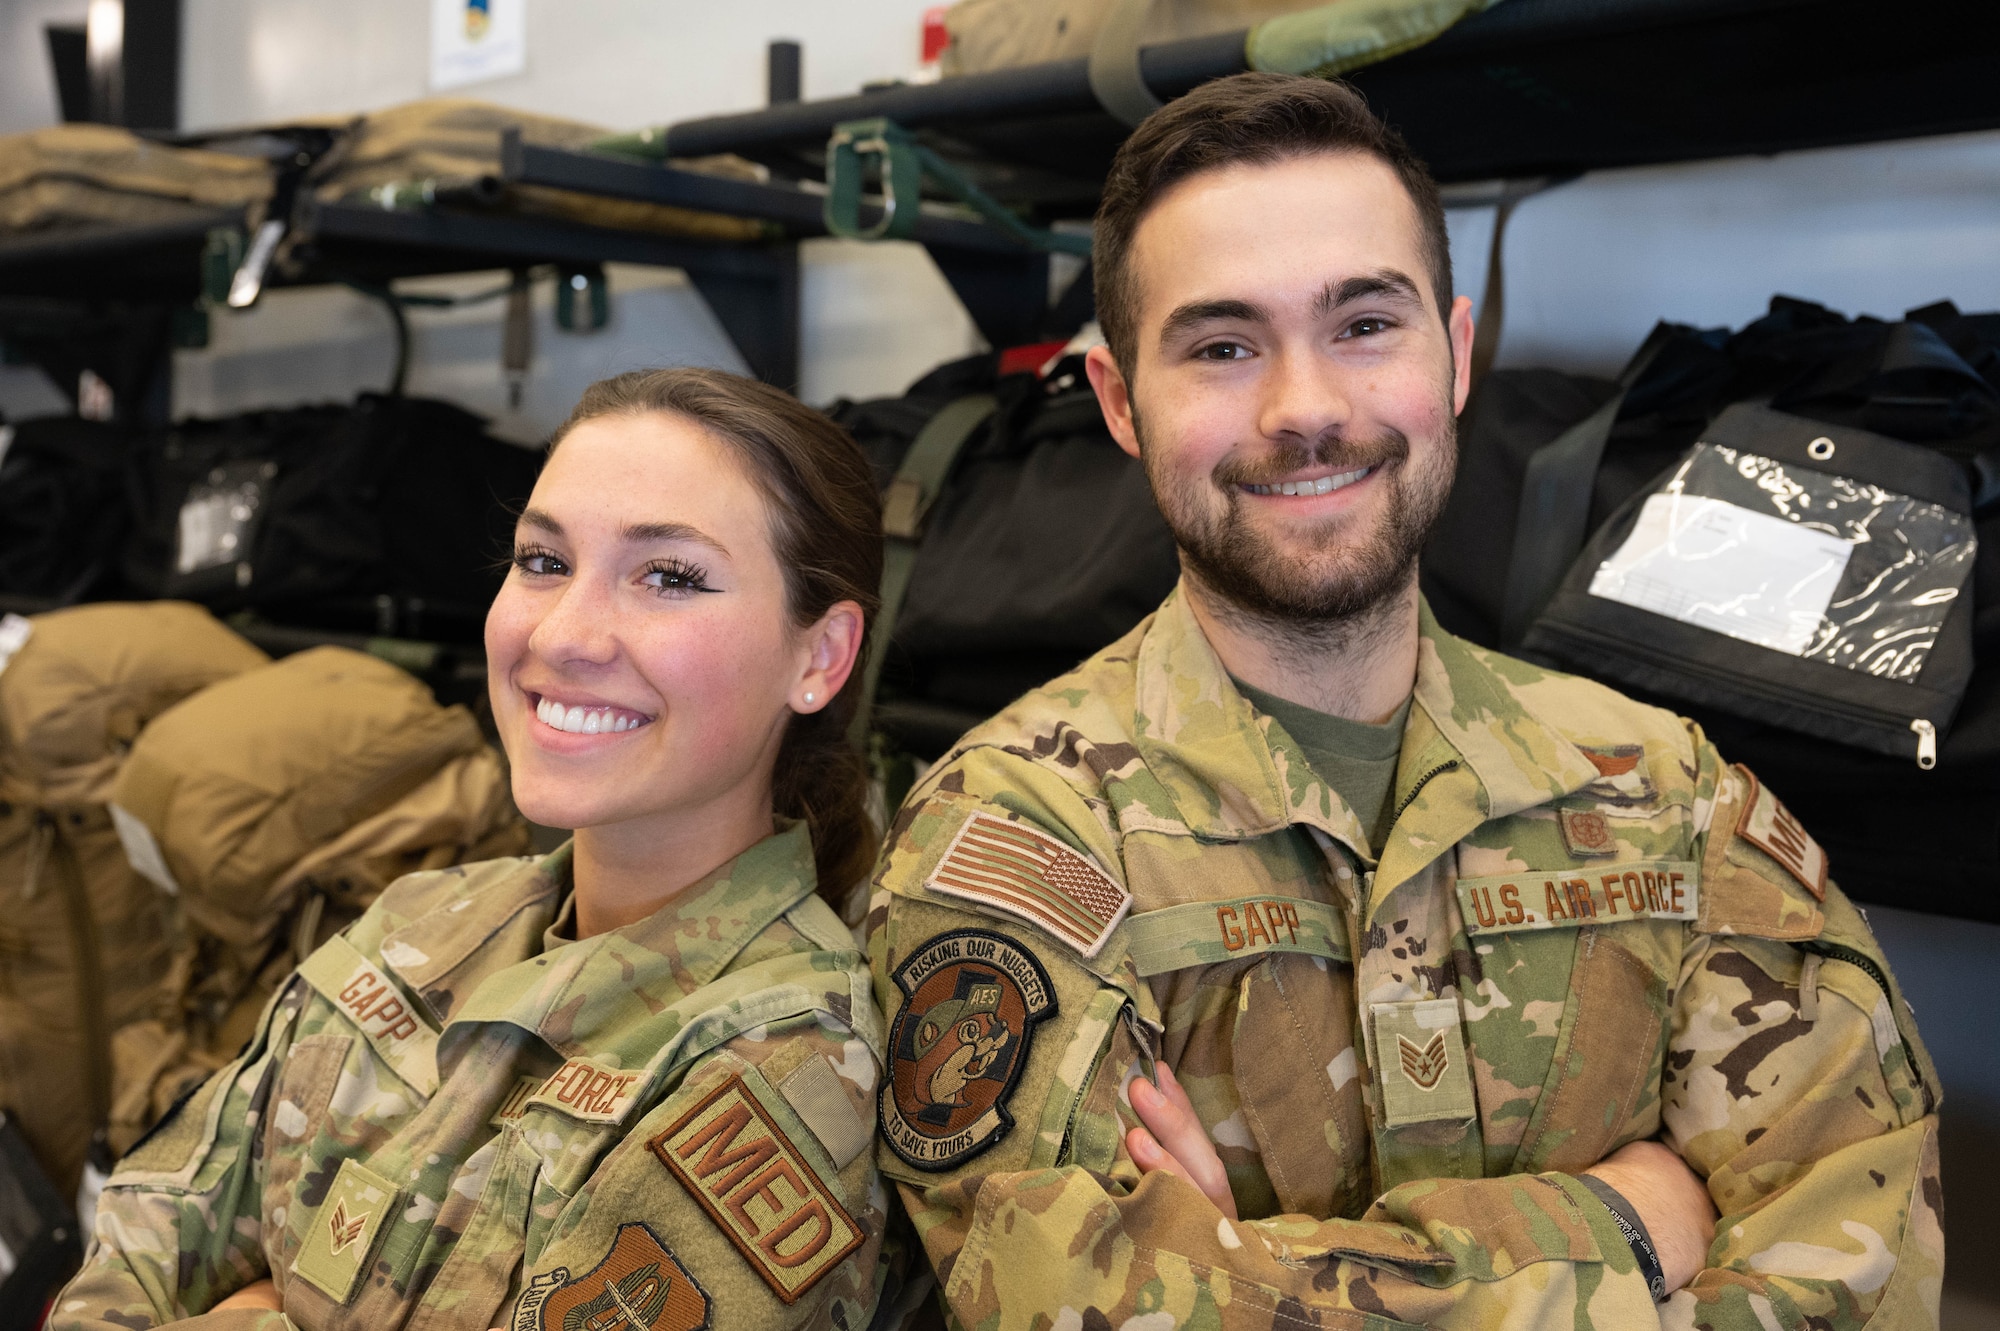 Staff Sgt. Michael Gapp, right, and his sister Senior Airman Amelia Gapp, both 934th Aeromedical Evacuation Squadron technicians, pose for a photo at the Minneapollis-St. Paul Air Reserve Station, Minnesota, April 2, 2023. The Gapp siblings have supported one another since their enlistments and have the rare opportunity to work near each other in service. (U.S. Air Force photo by Senior Airman Victoriya Tarakanova)